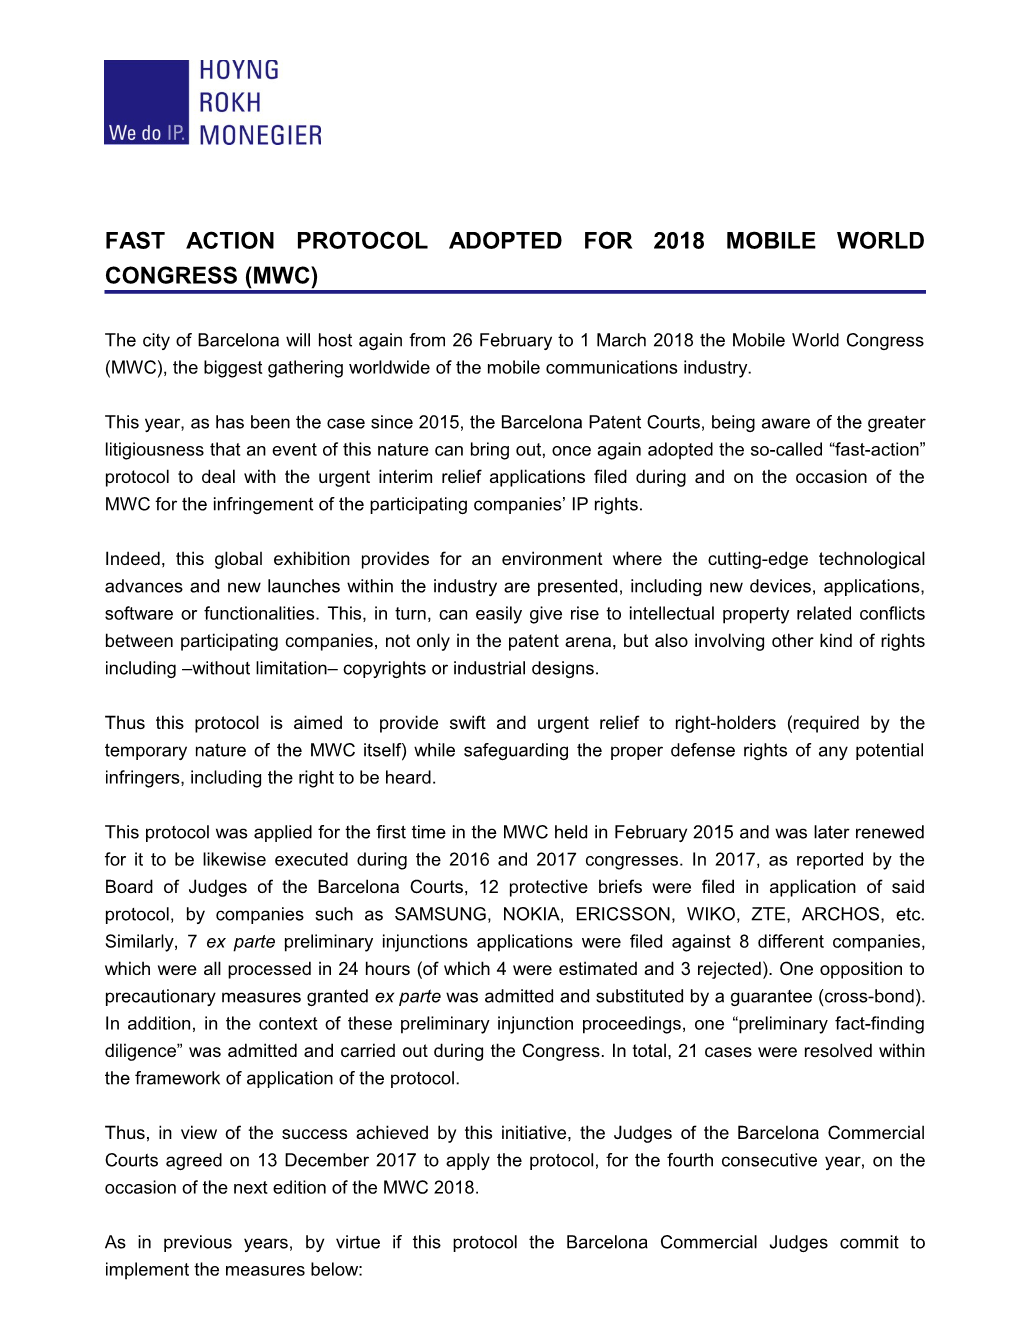 Fast Action Protocol Adopted for 2018 Mobile World Congress (Mwc)